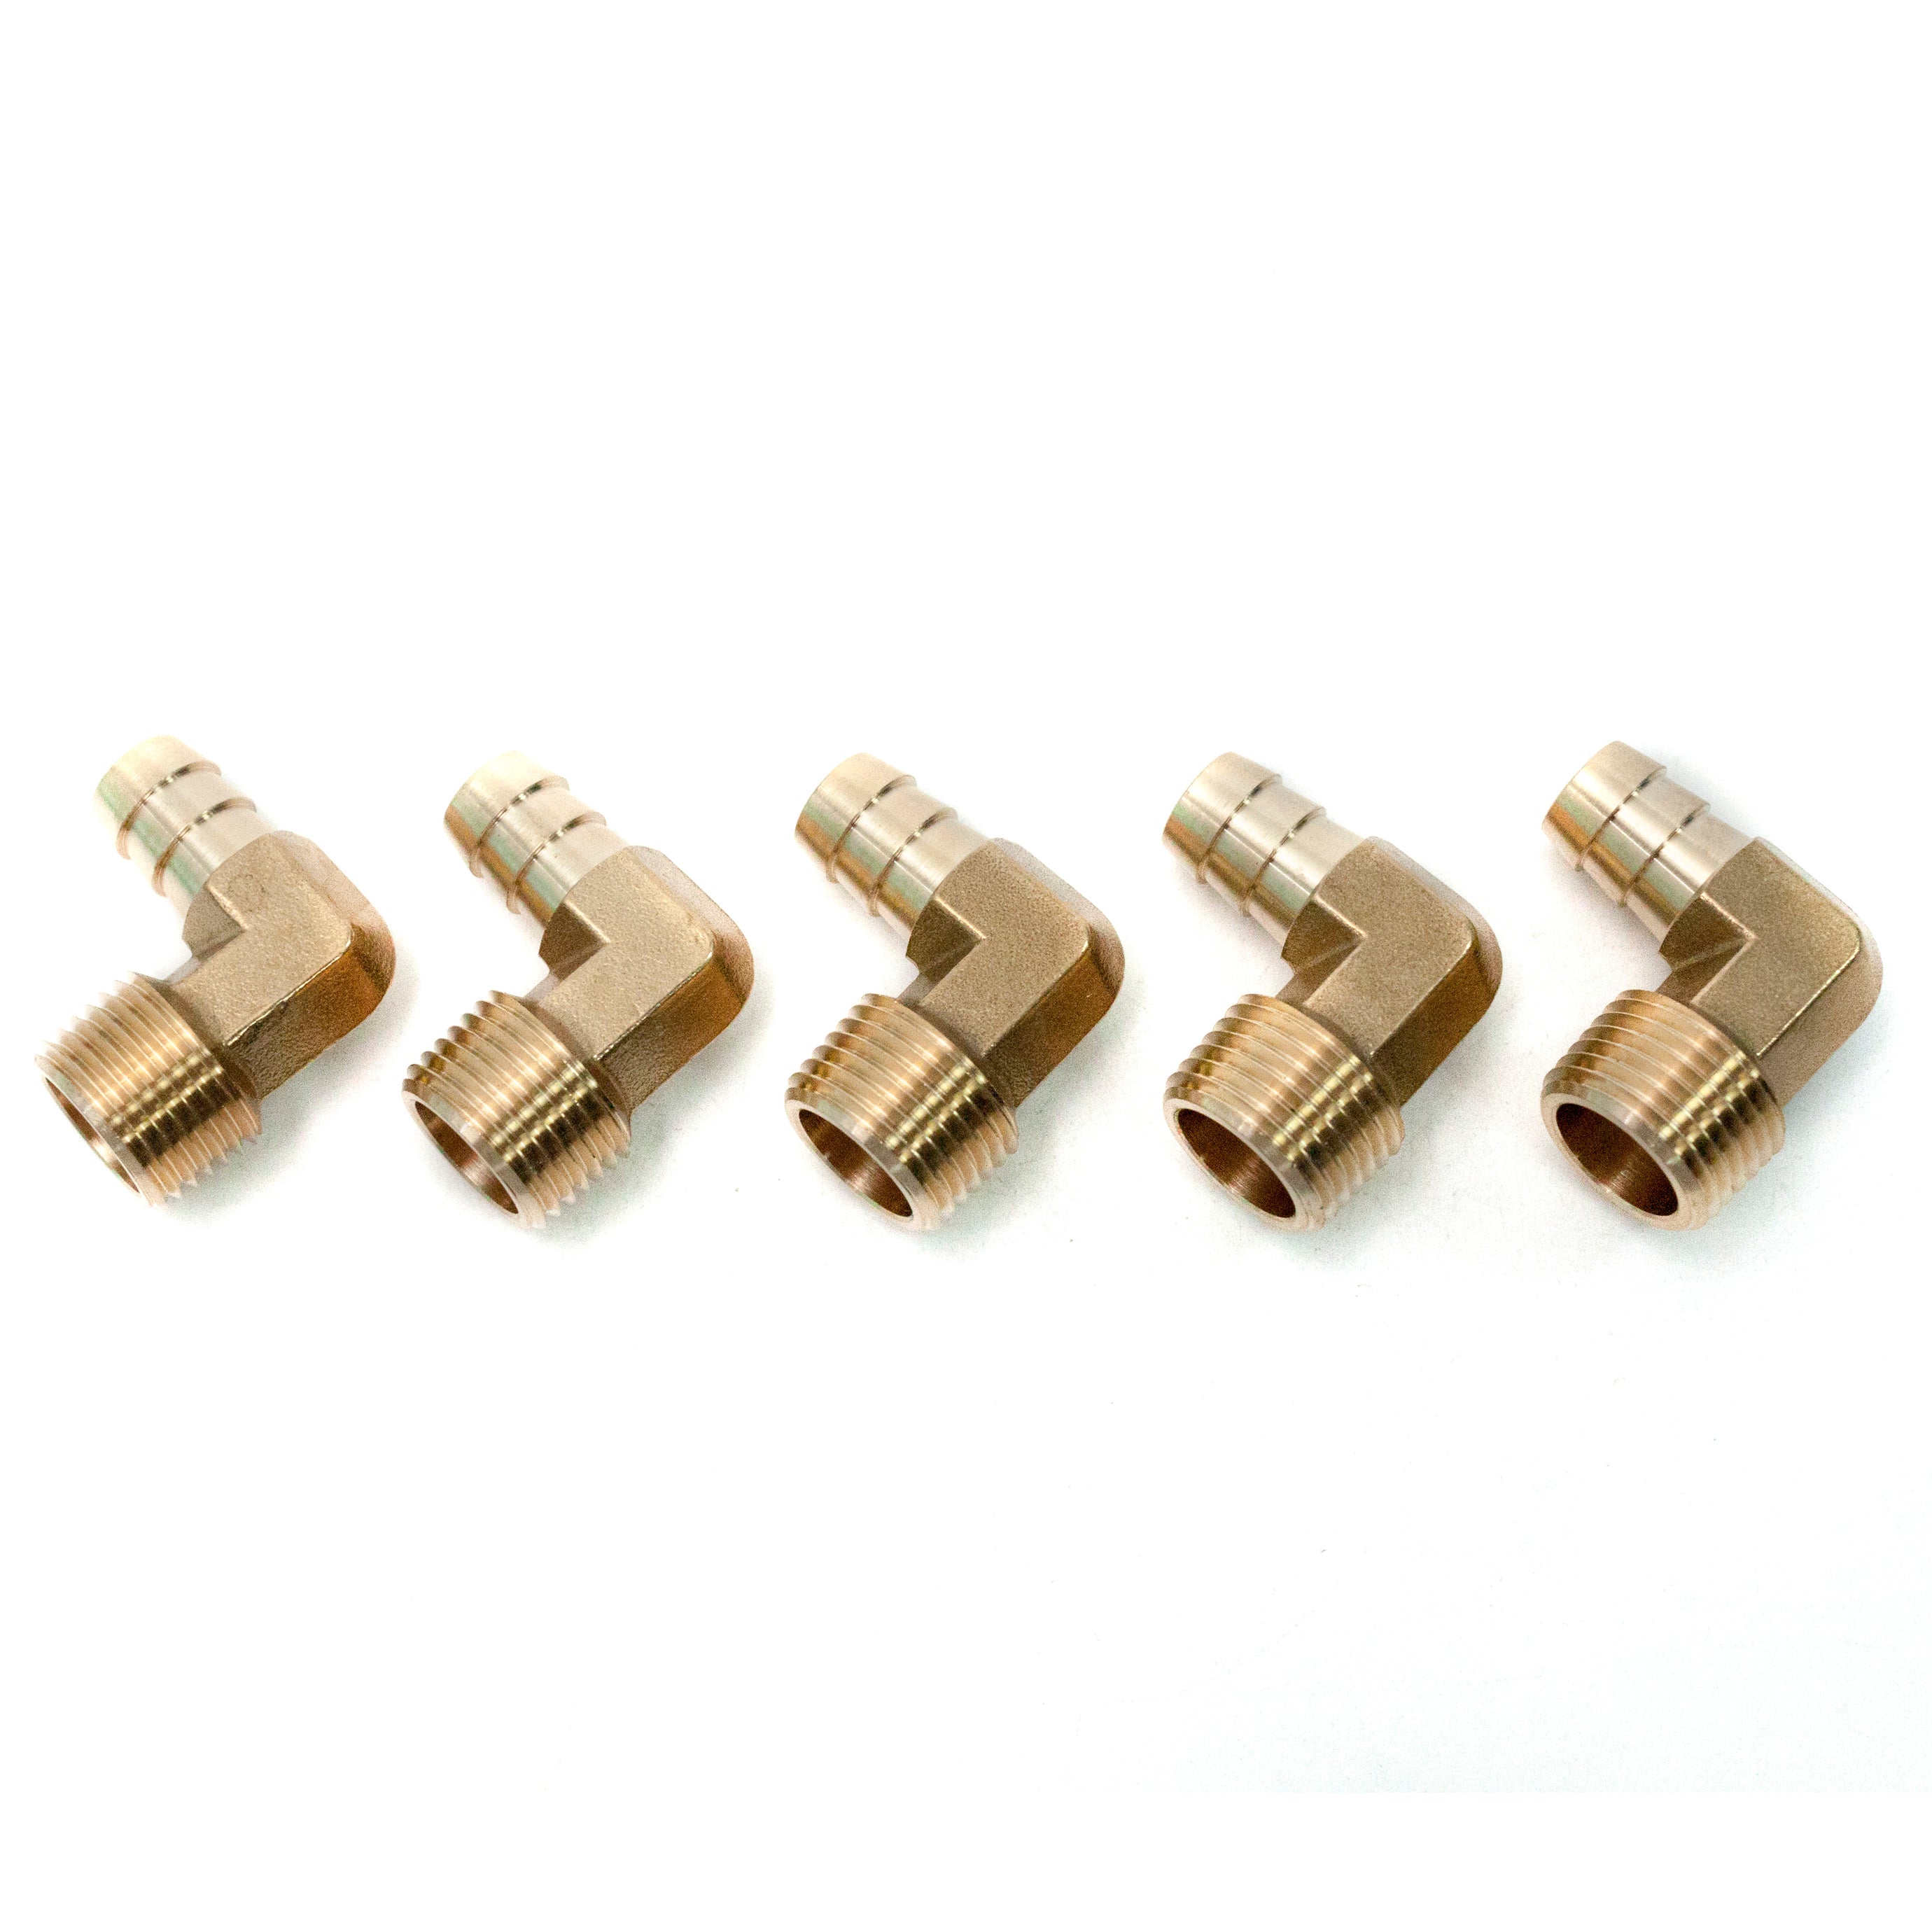 LTWFITTING 90 Degree Elbow Brass Barb Fitting 1/2 ID Hose x 1/2-Inch Male NPT Air(Pack of 5)